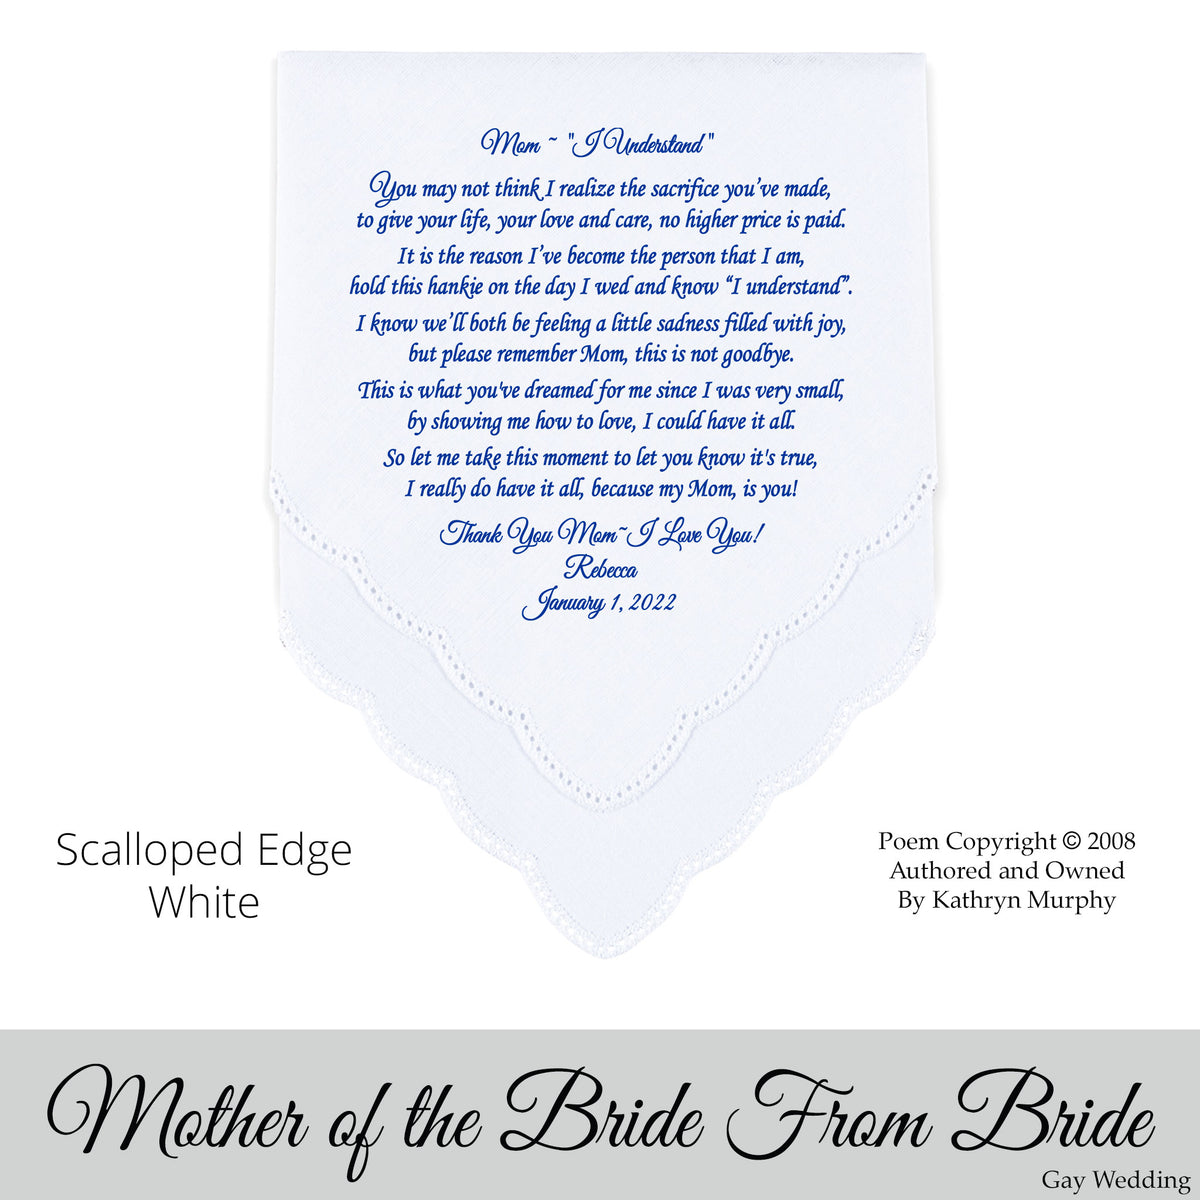 Gay Wedding Gift for the mother of the bride poem printed wedding hankie